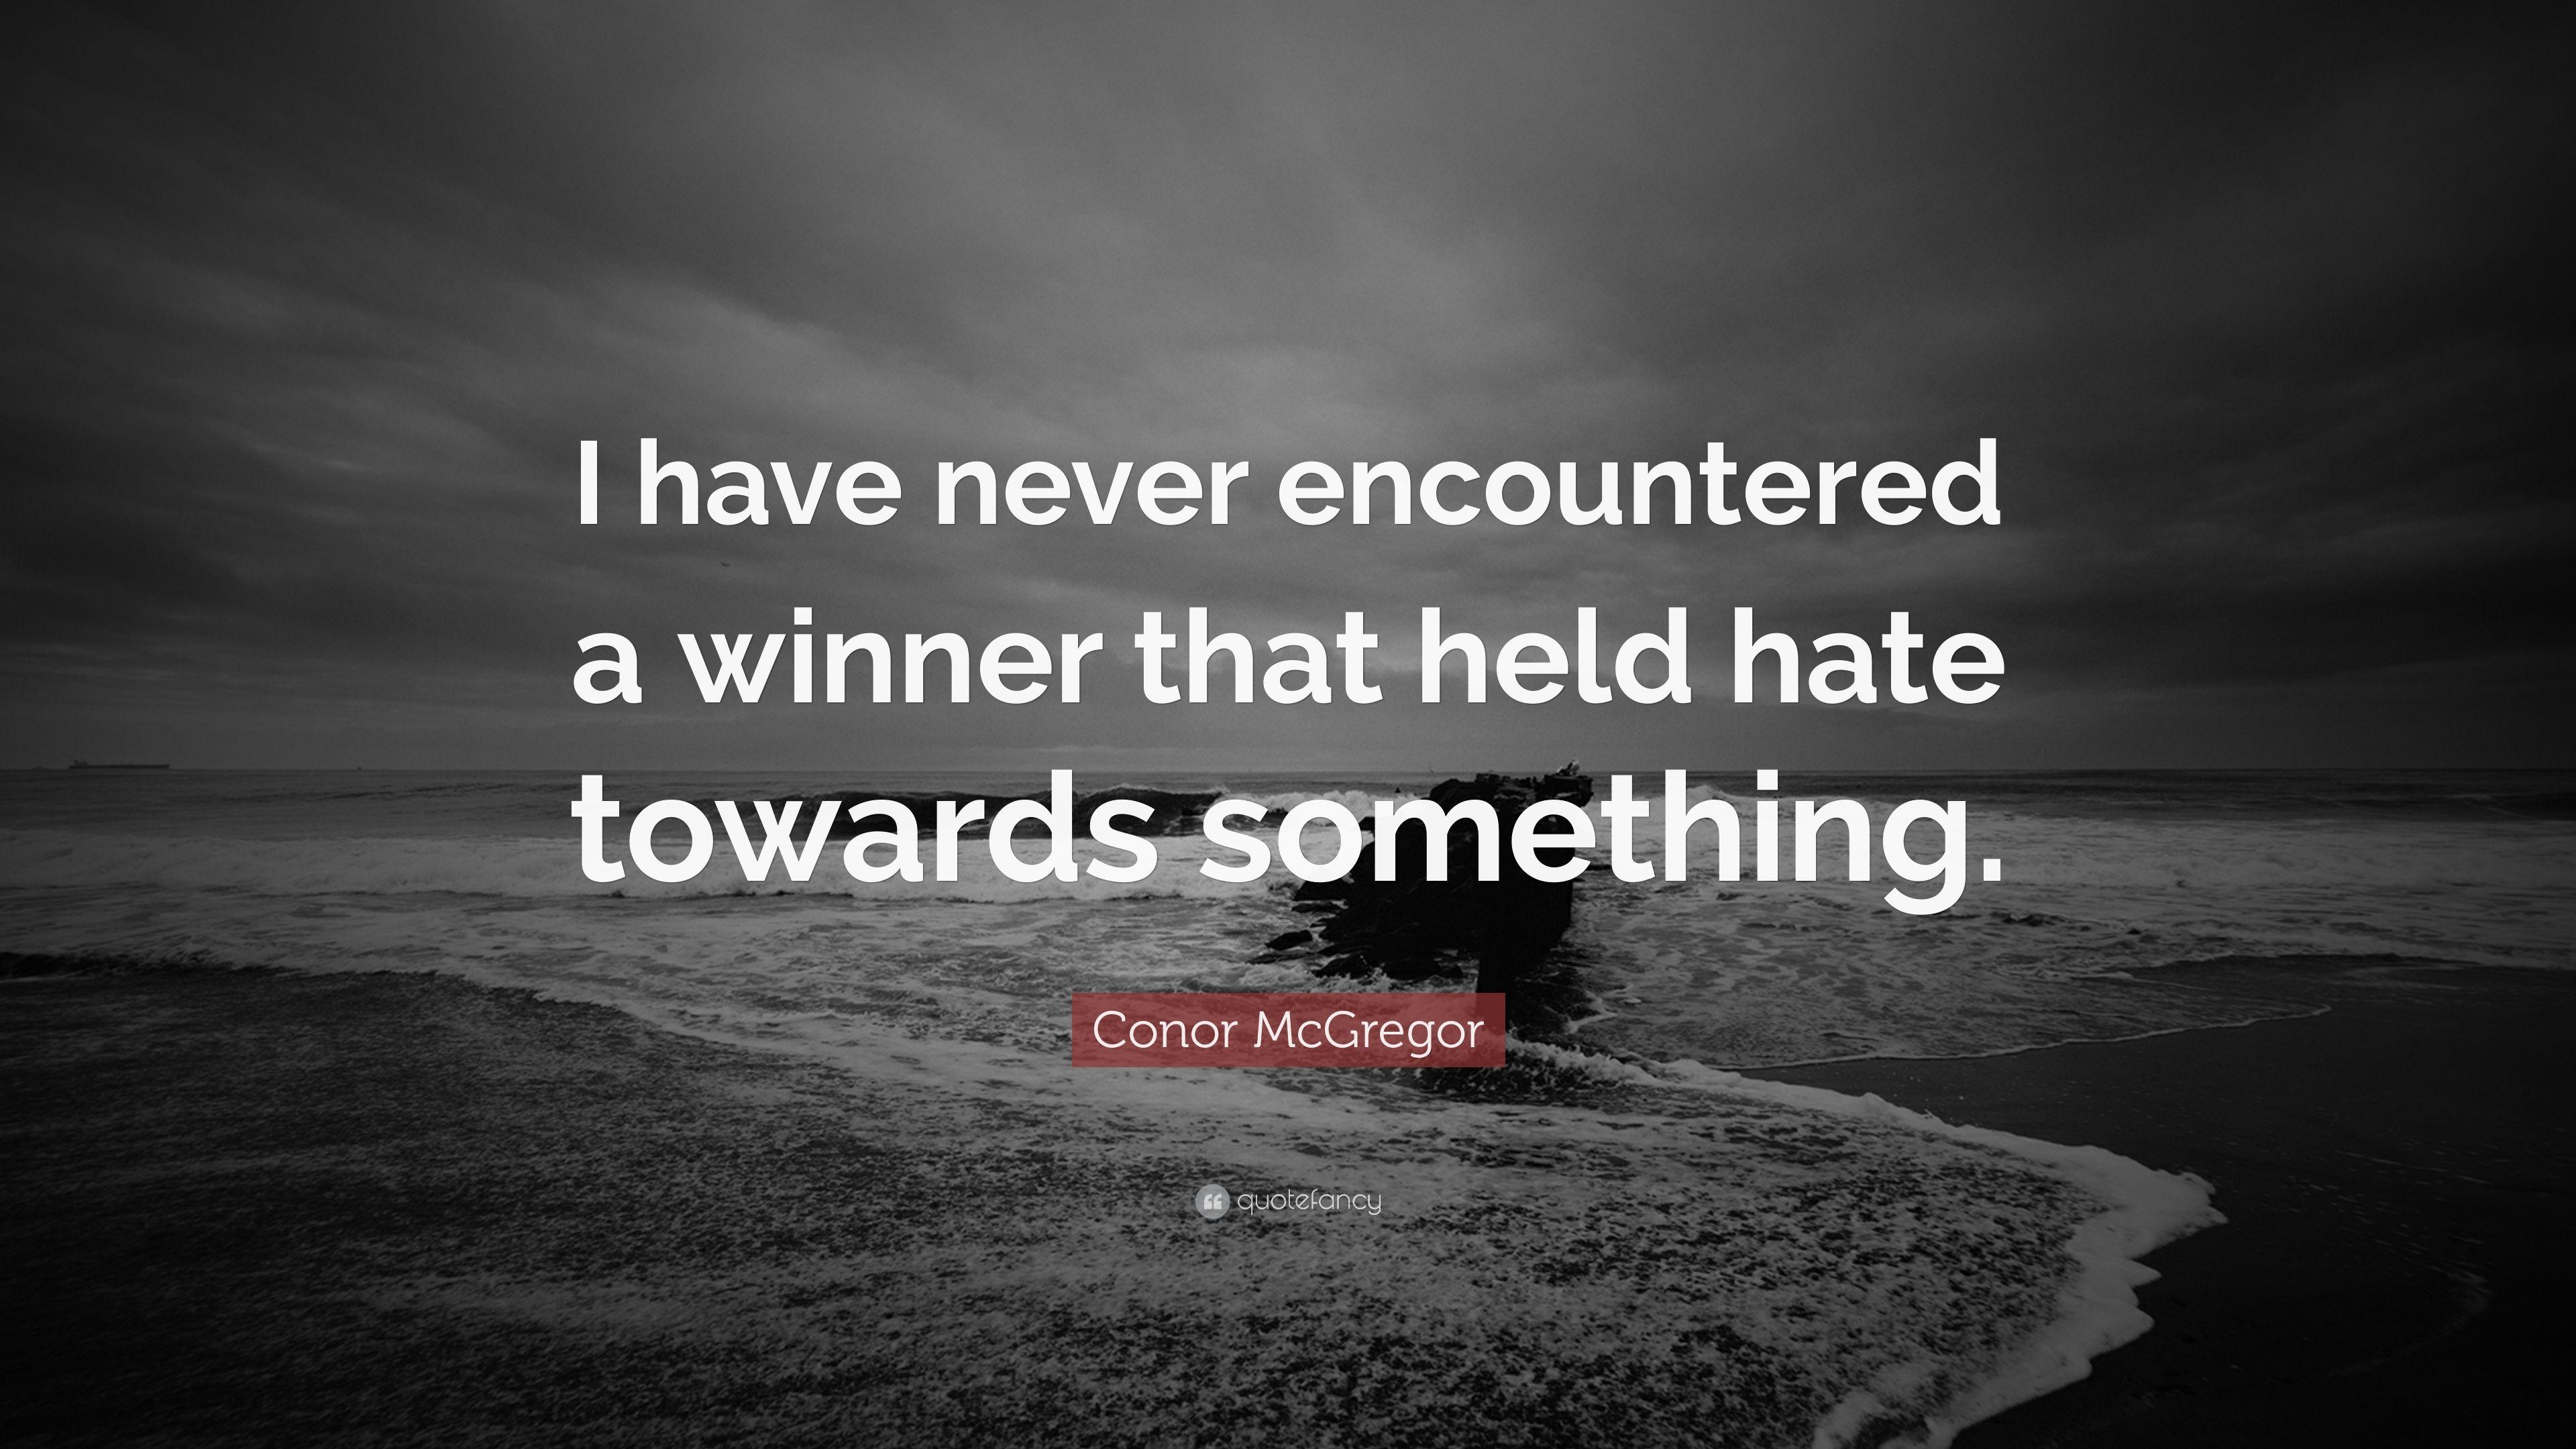 Conor McGregor Quote: “I have never encountered a winner that held